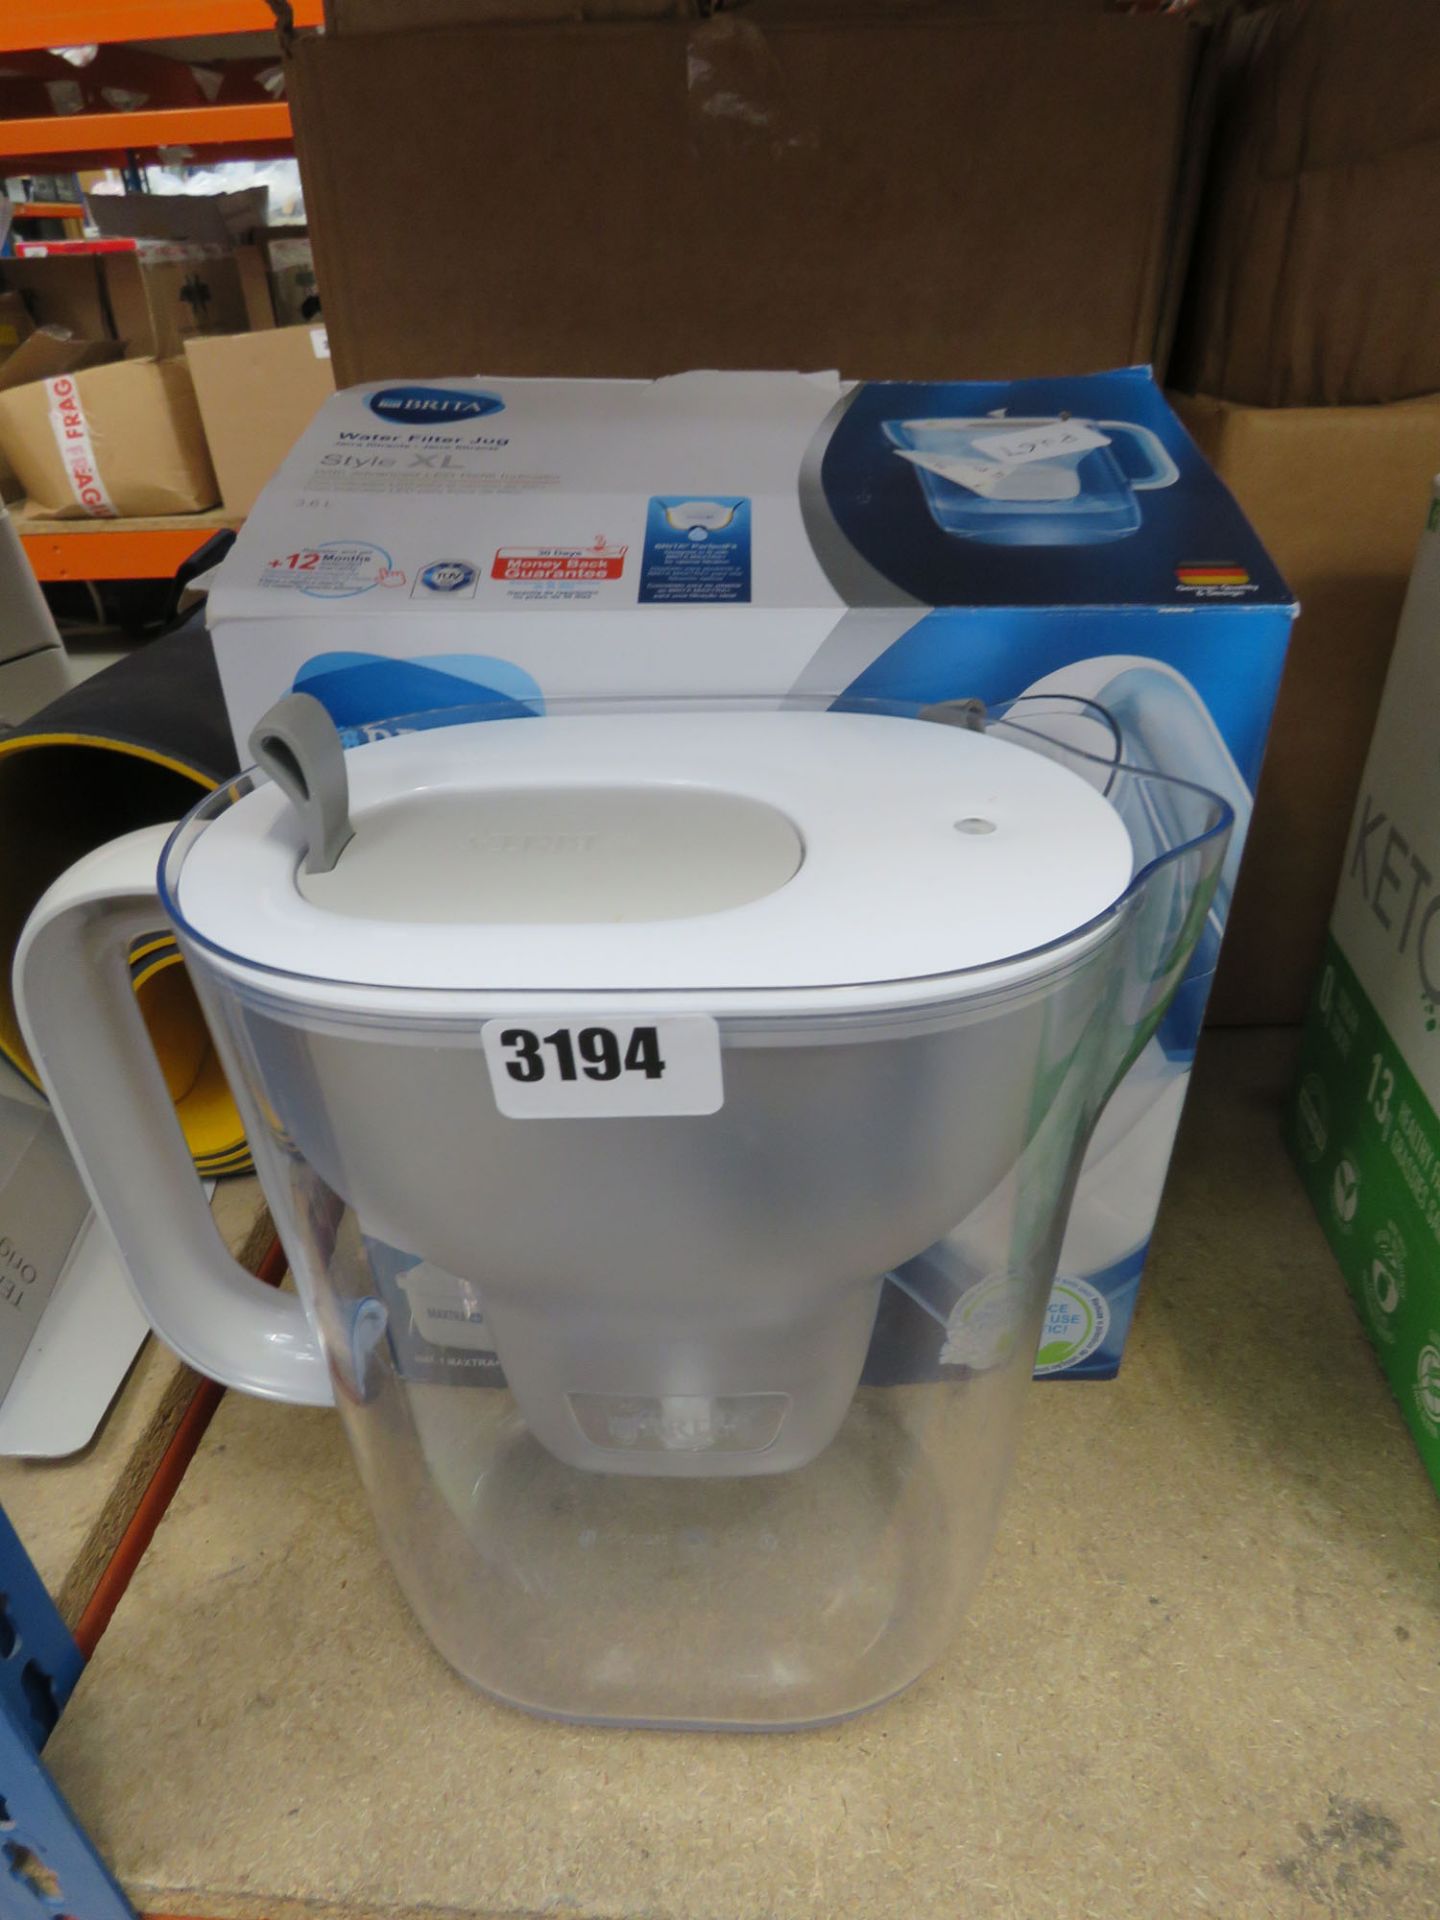 1 boxed and 1 unboxed Brita water filter jug